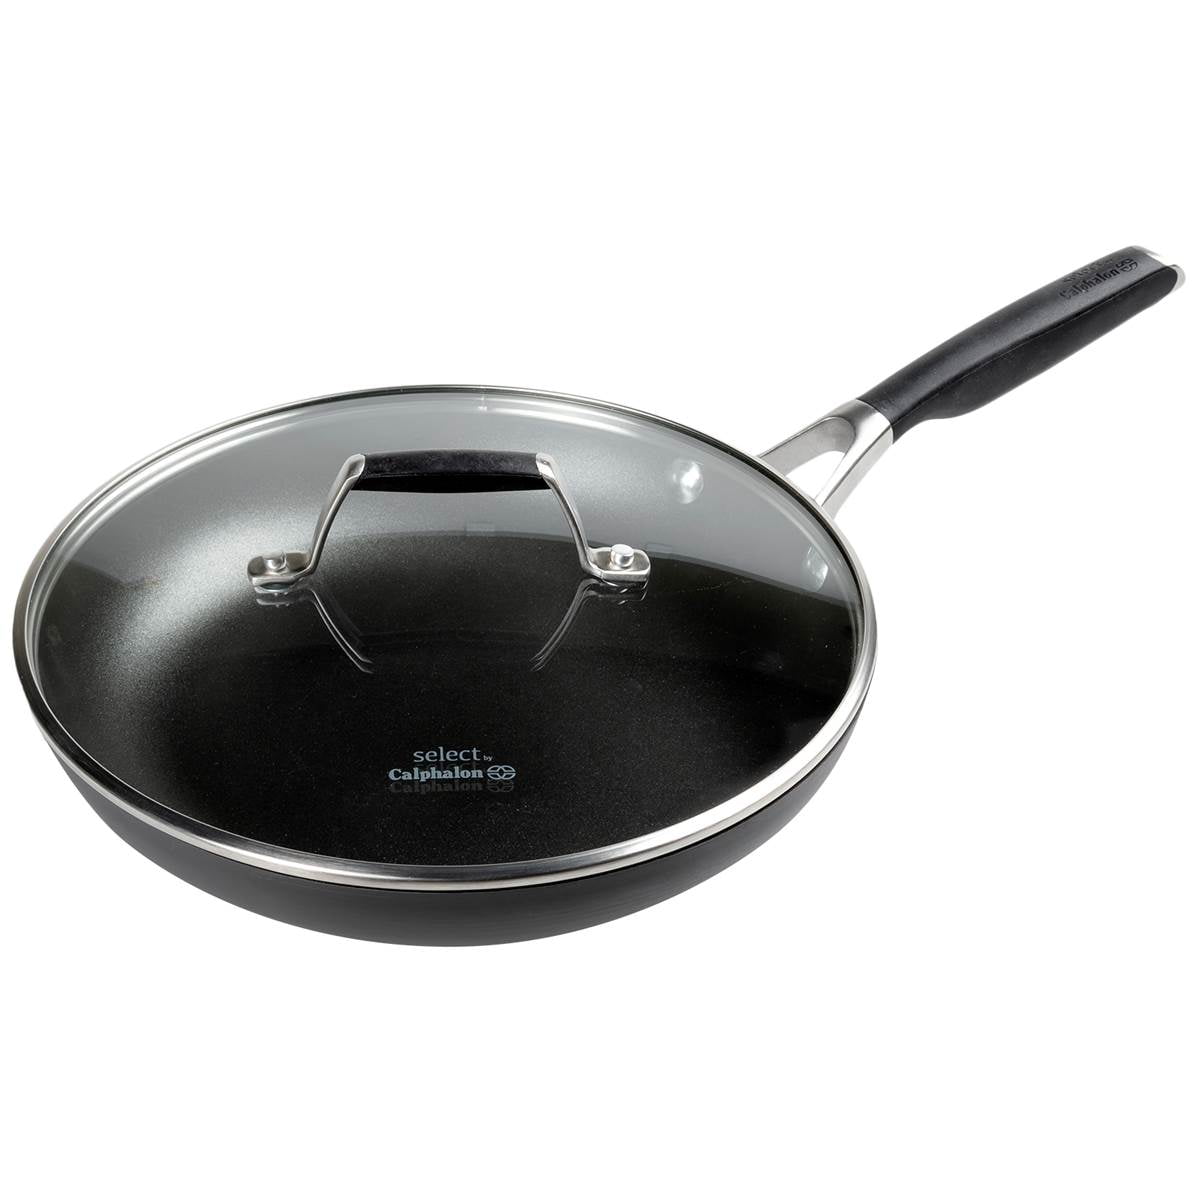 Hard Anodized Nonstick 12 Inch Fry Pan With Lid Dishwasher Safe Frying Pan Black 